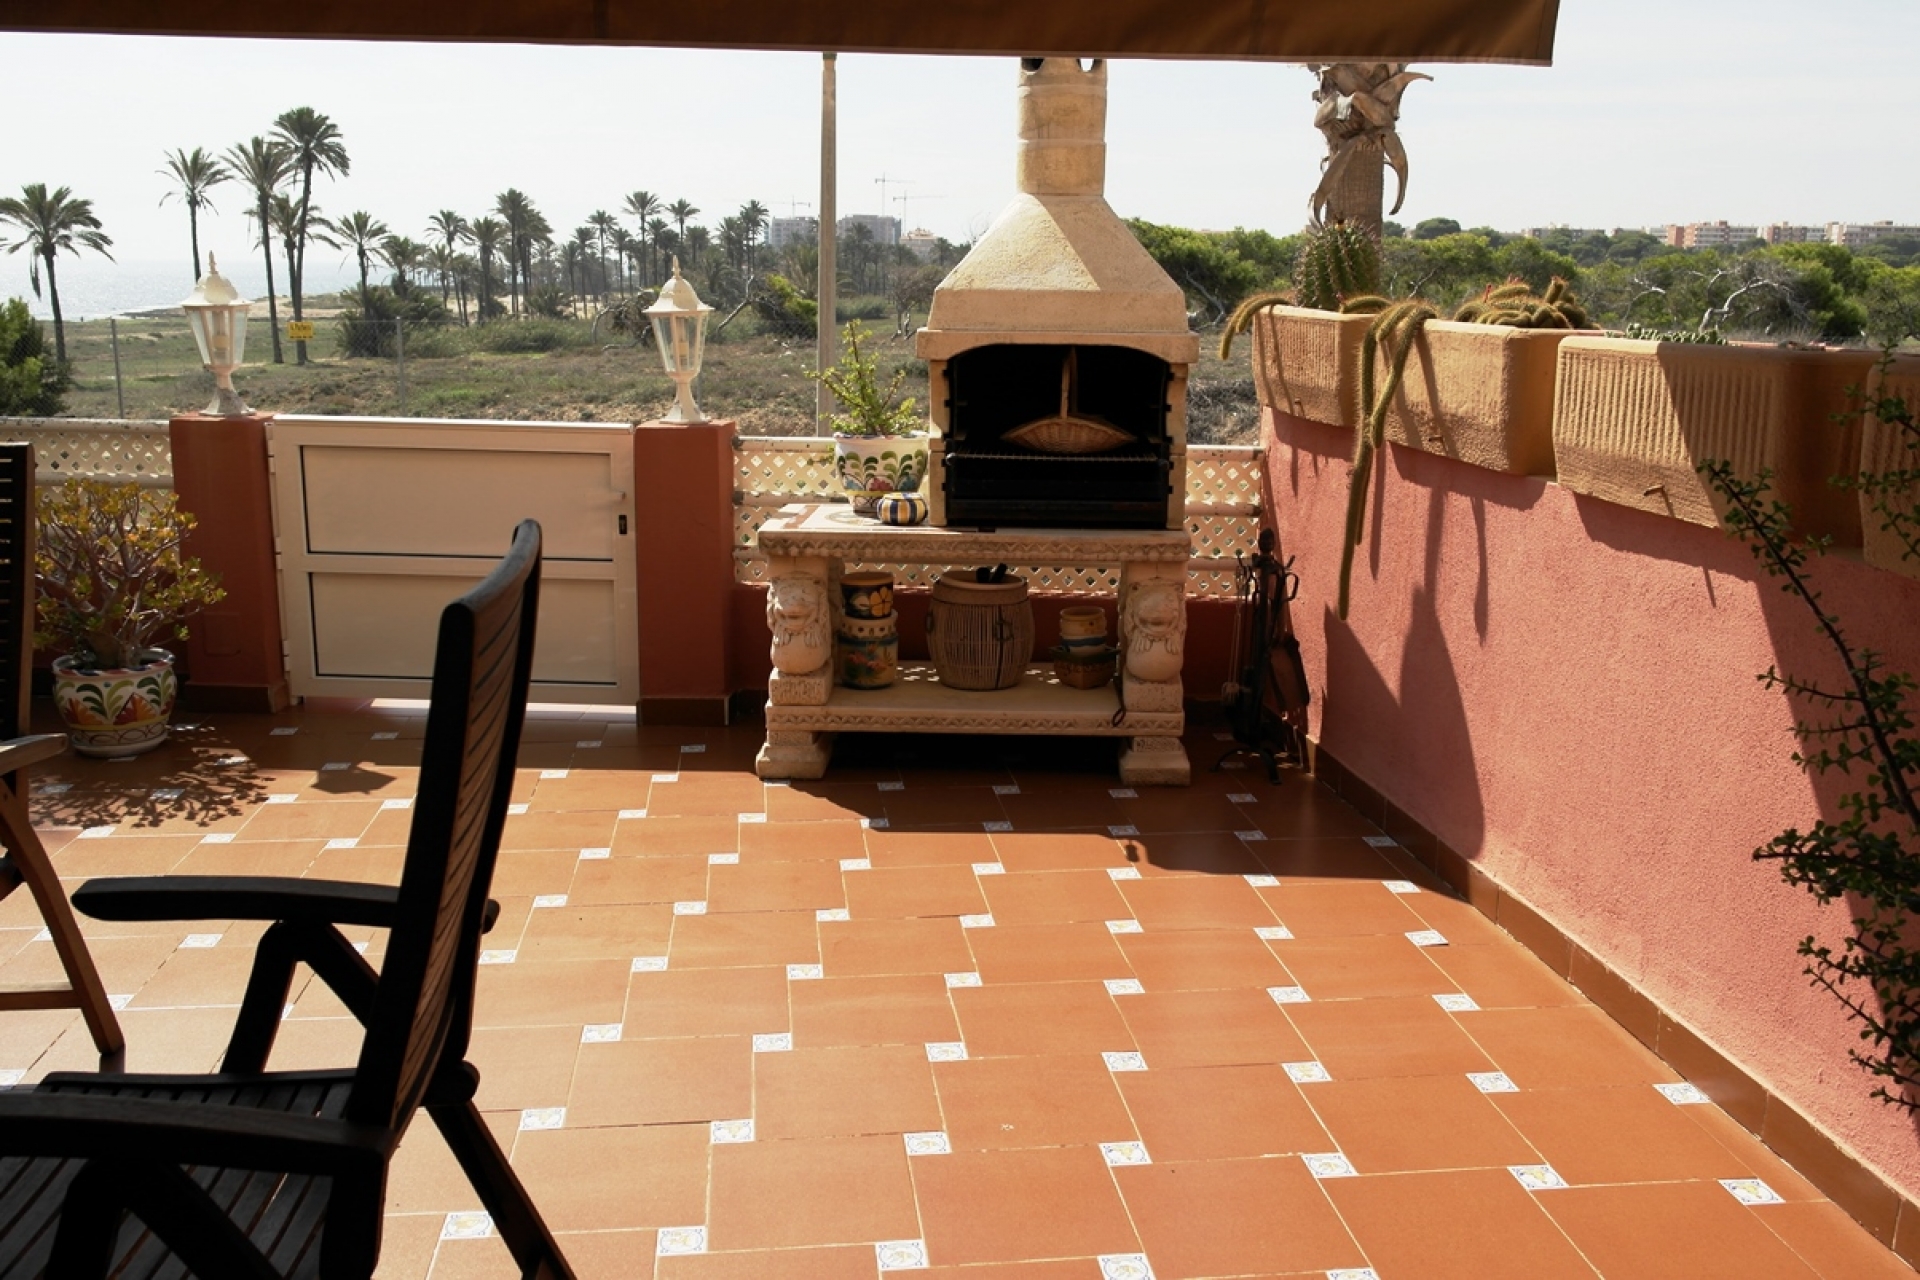 Archived - Townhouse for sale - Orihuela Costa - Punta Prima